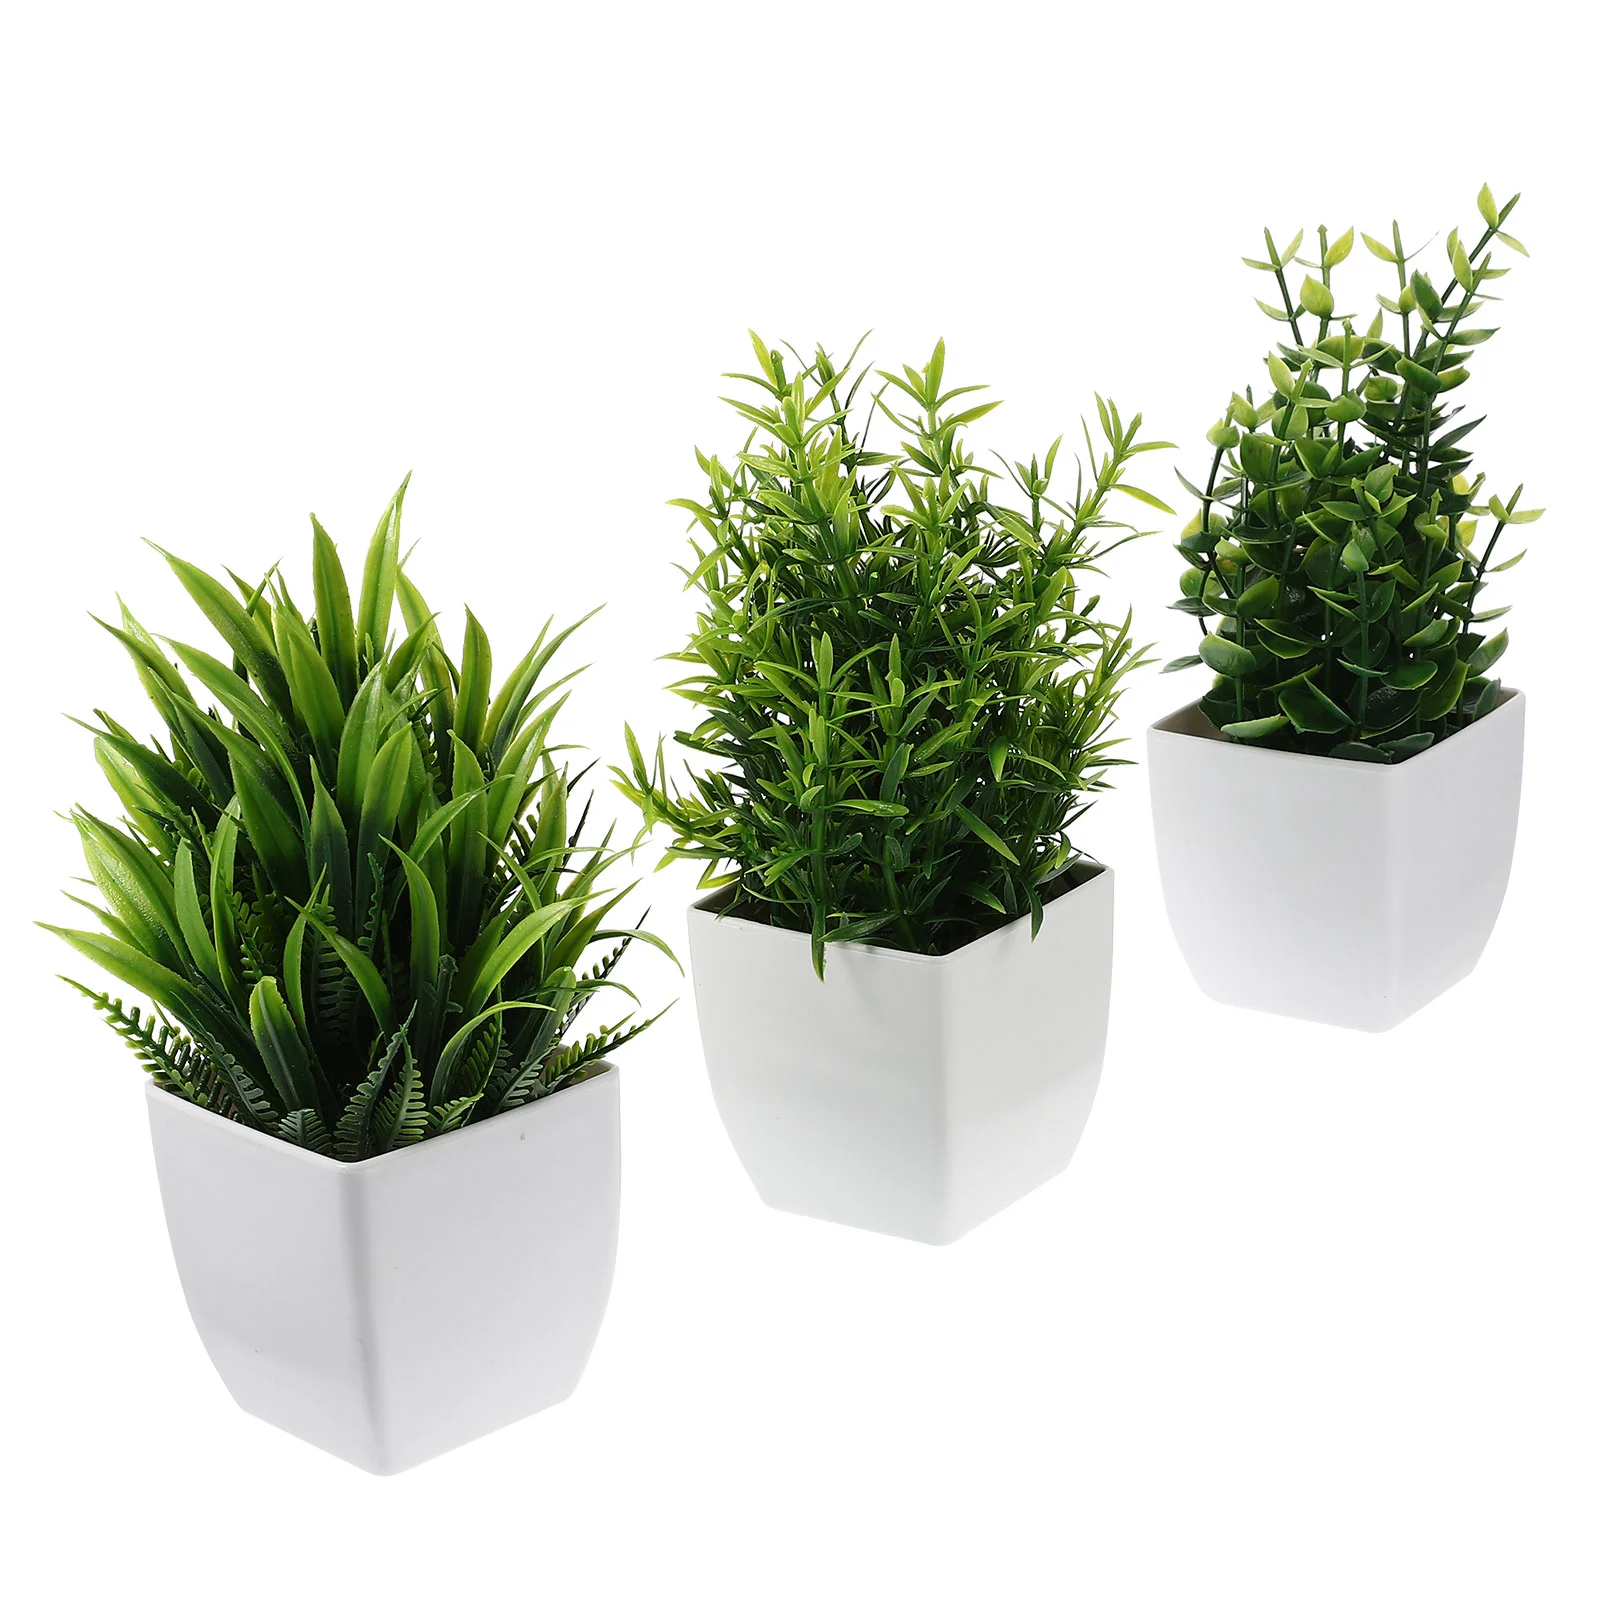 

3 Pcs Simulated Potted Plant Artificial Indoor Plants False Ornaments Green Fake Bonsai Figurine Pp Adornments Office Home